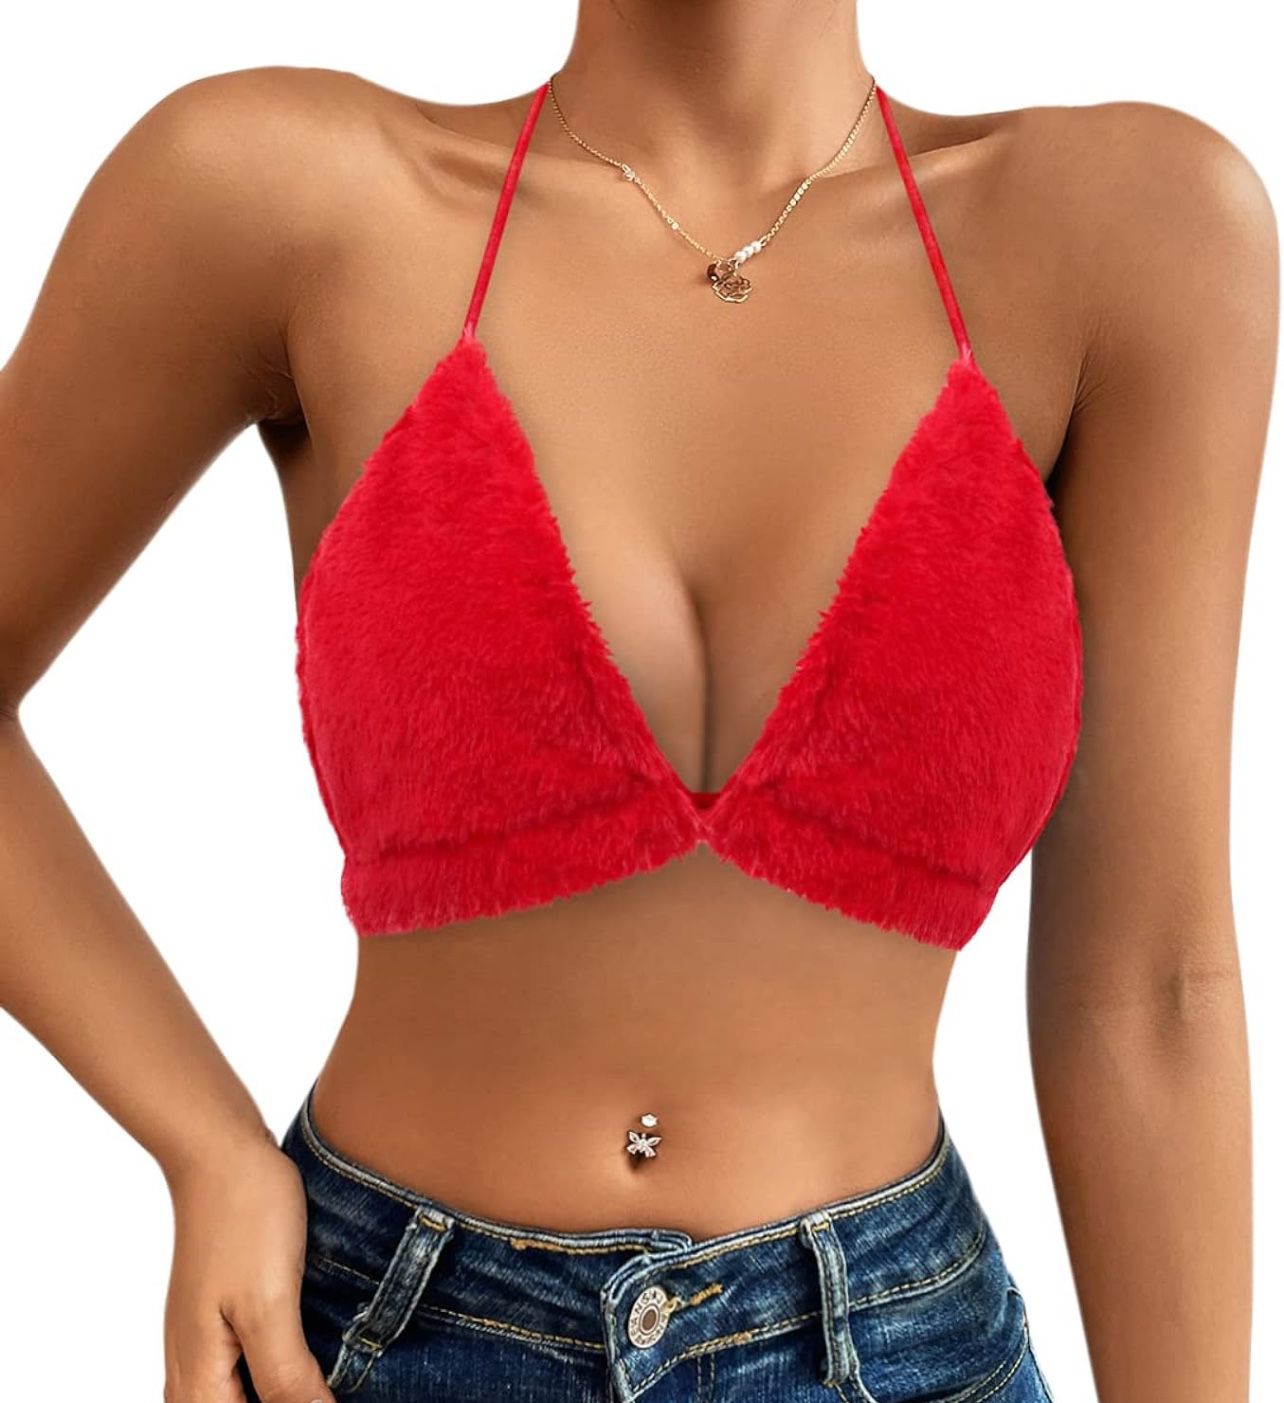 Small Red Bra Top 